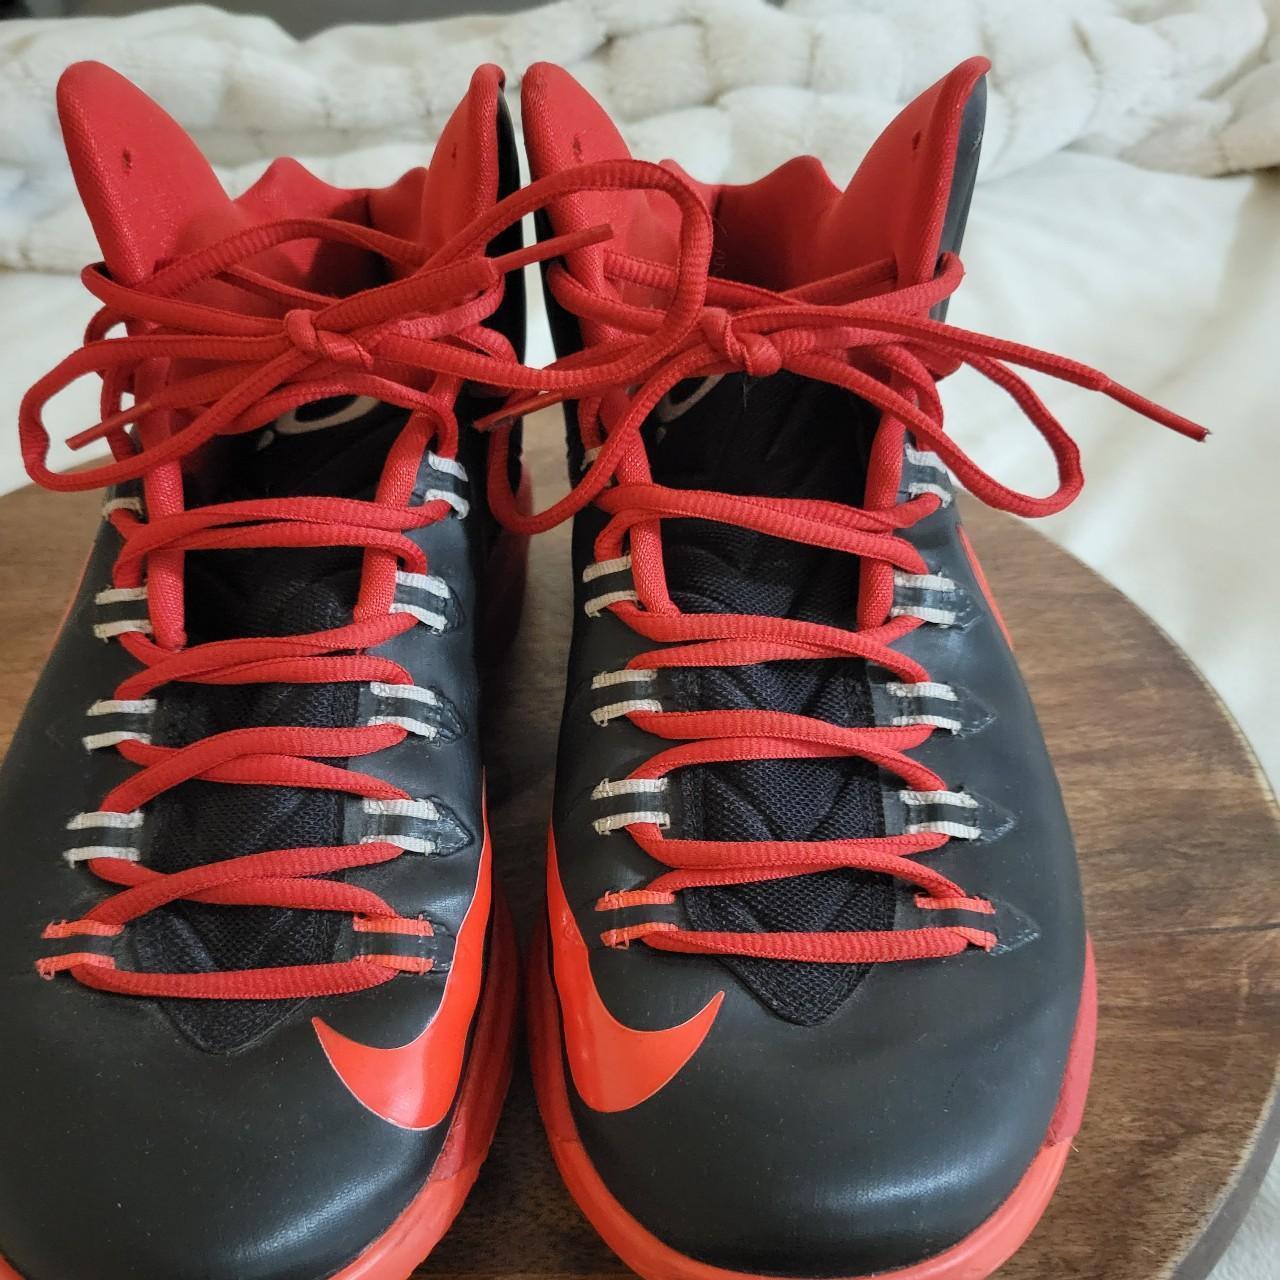 kd 5 black and red